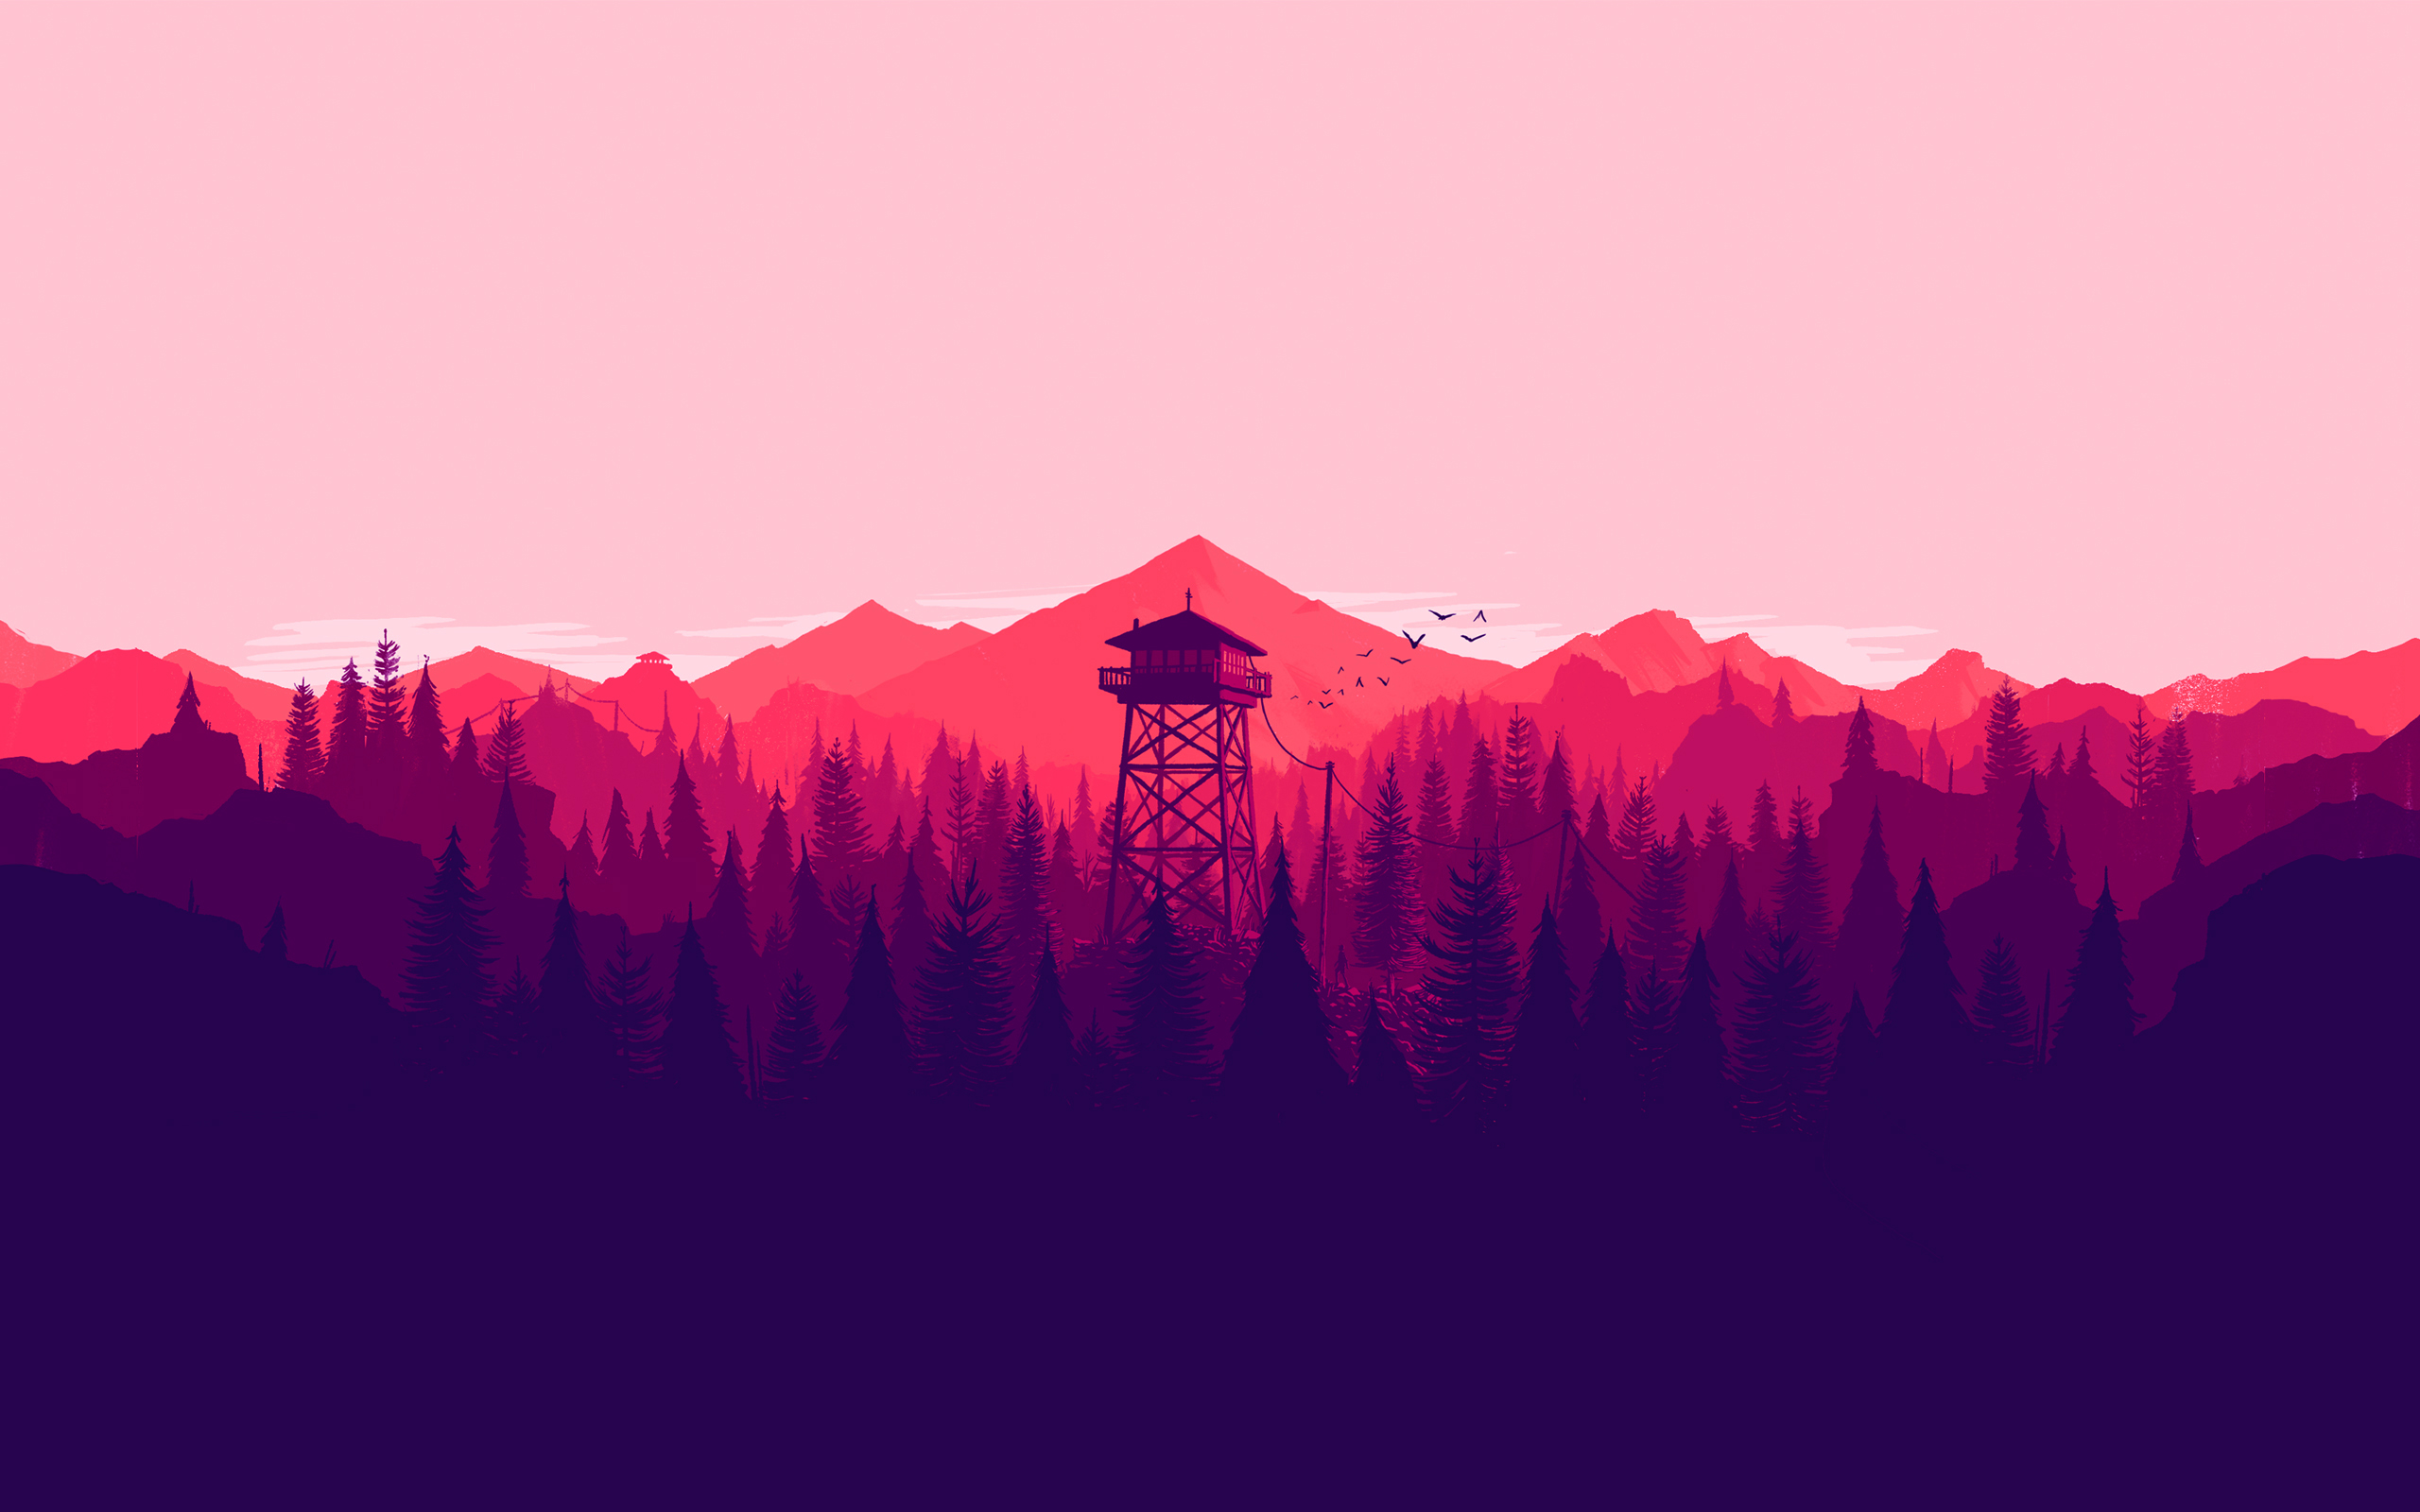 #landscape, #Firewatch, #tower, #colorful, #minimalism, # illustration, #Olly Moss, #forest, #digital art, #nature, #video games, #fire lookout tower, #low poly, #mountains, #artwork, wallpaper. Mocah.org HD Wallpaper